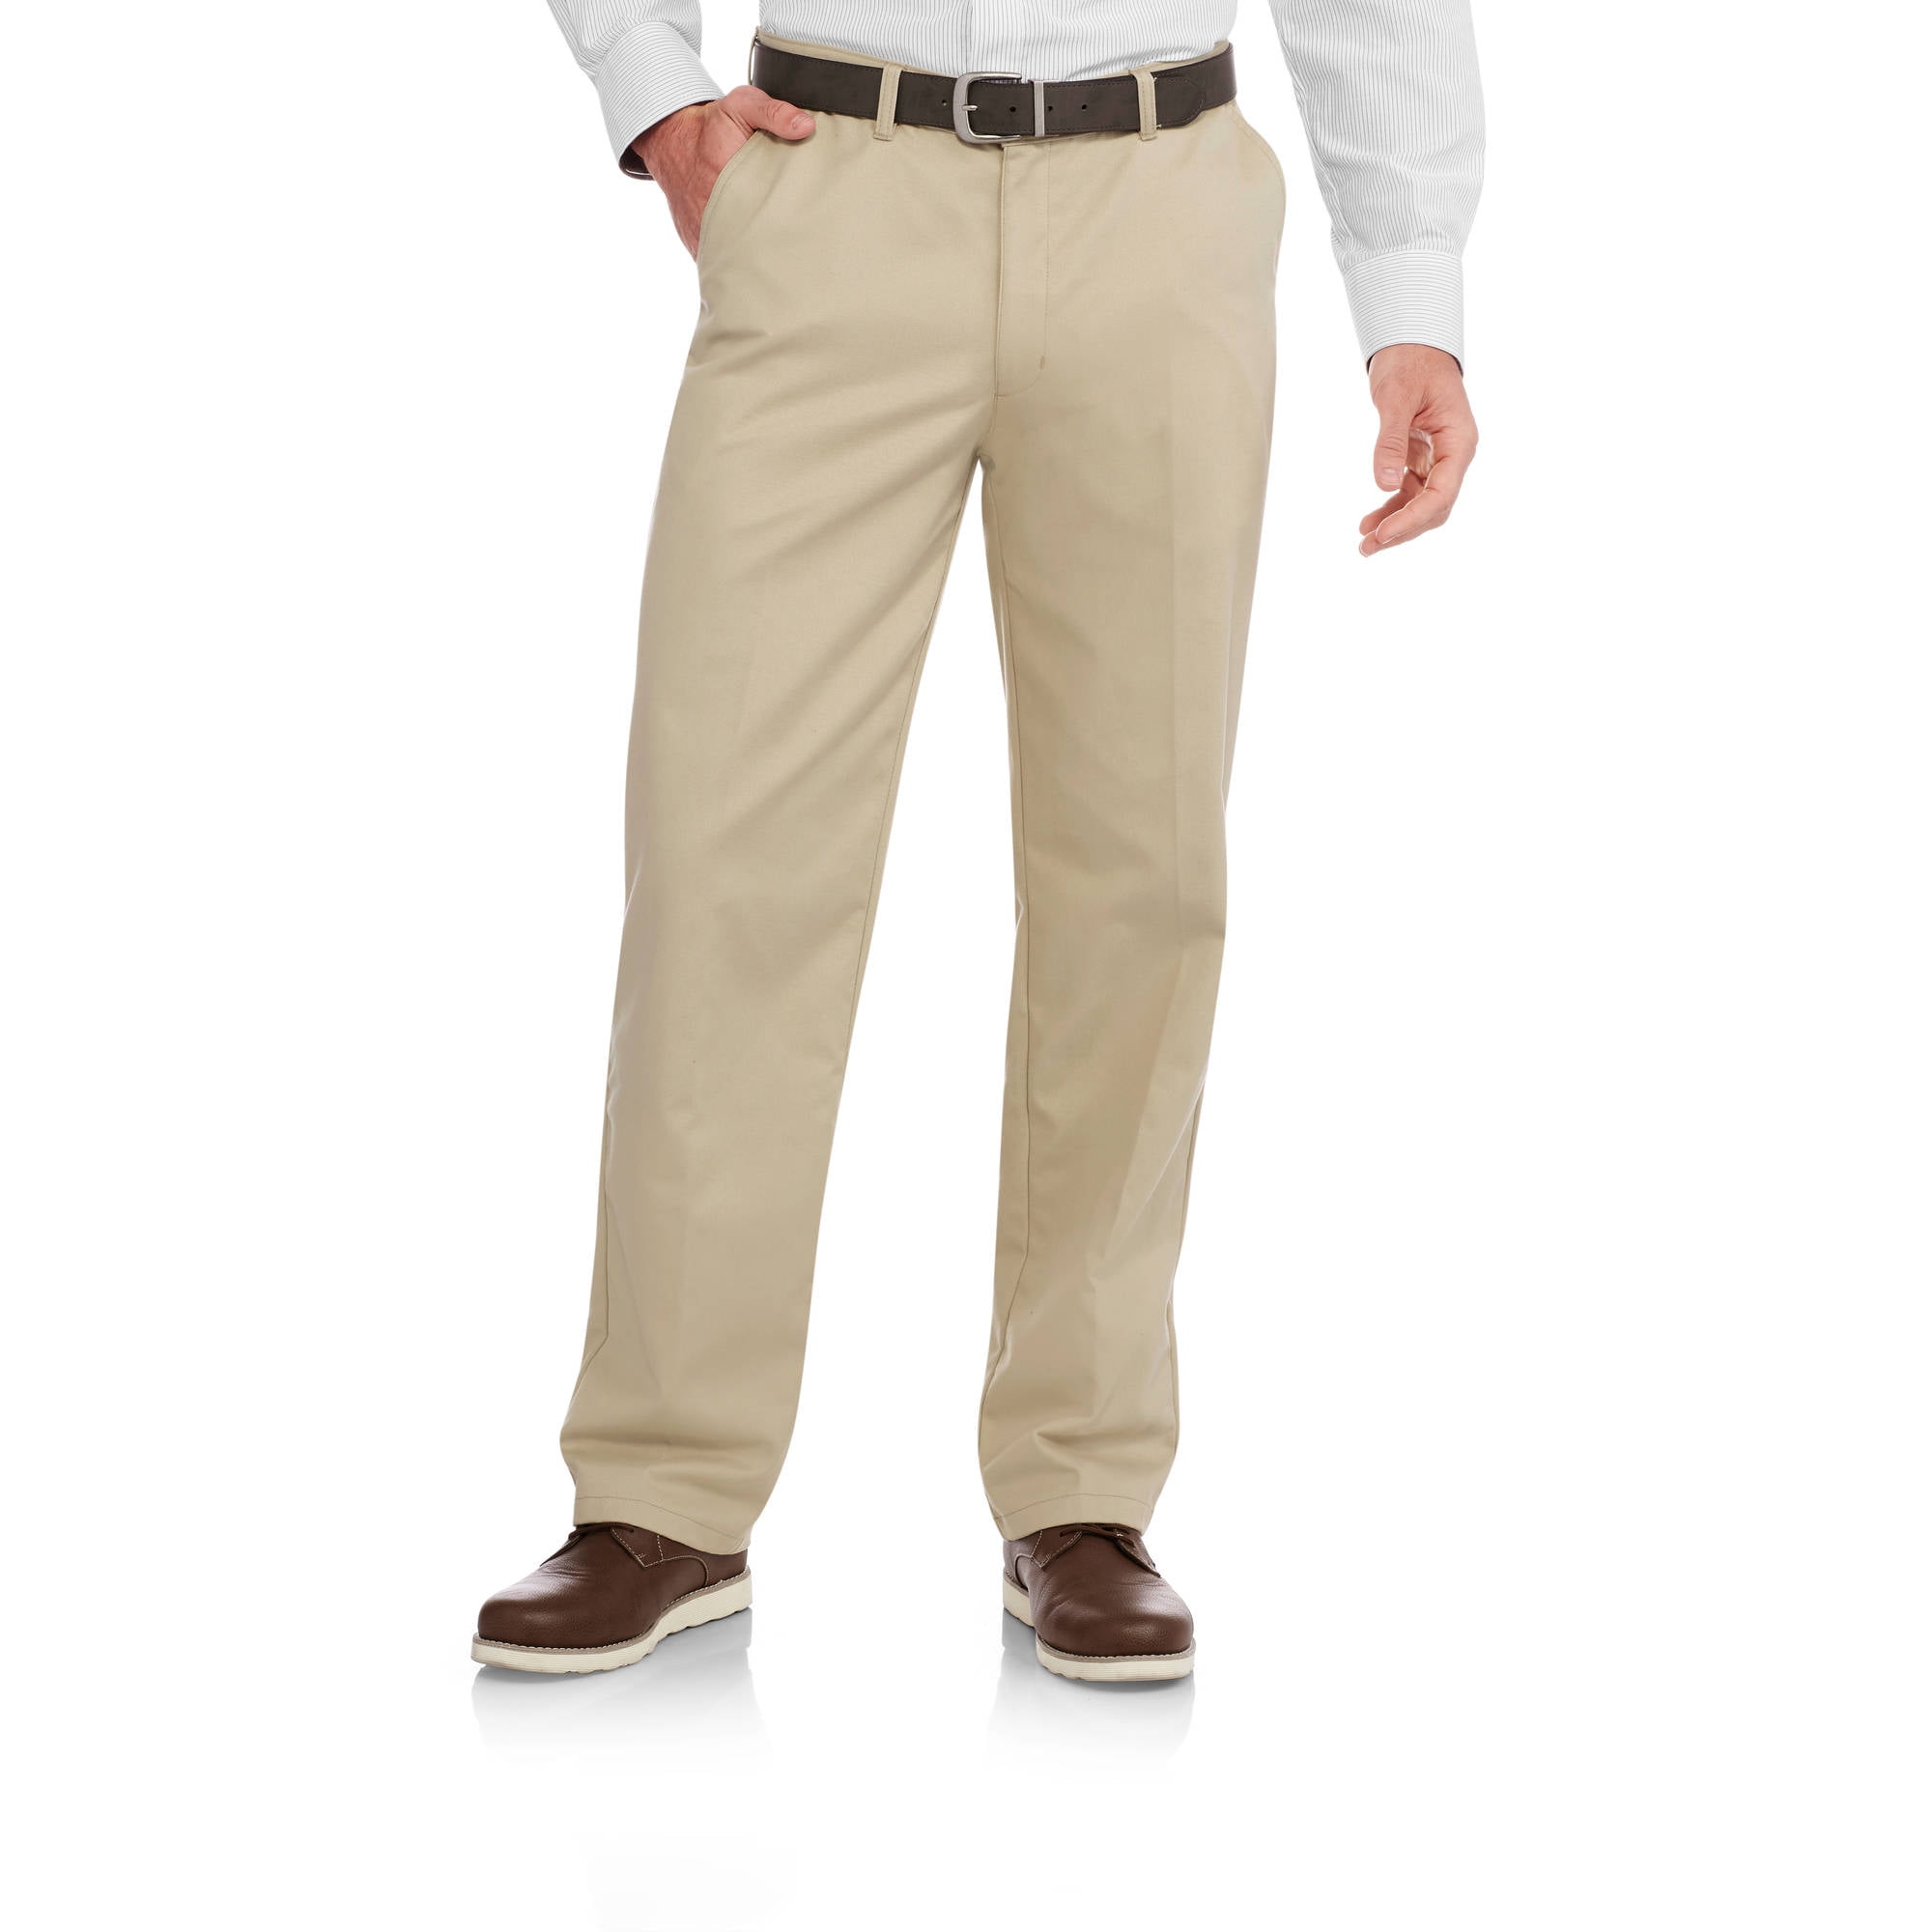 555 Turnpike DXL Big and Tall Wrinkle Resistant Twill Flat Front Pant 